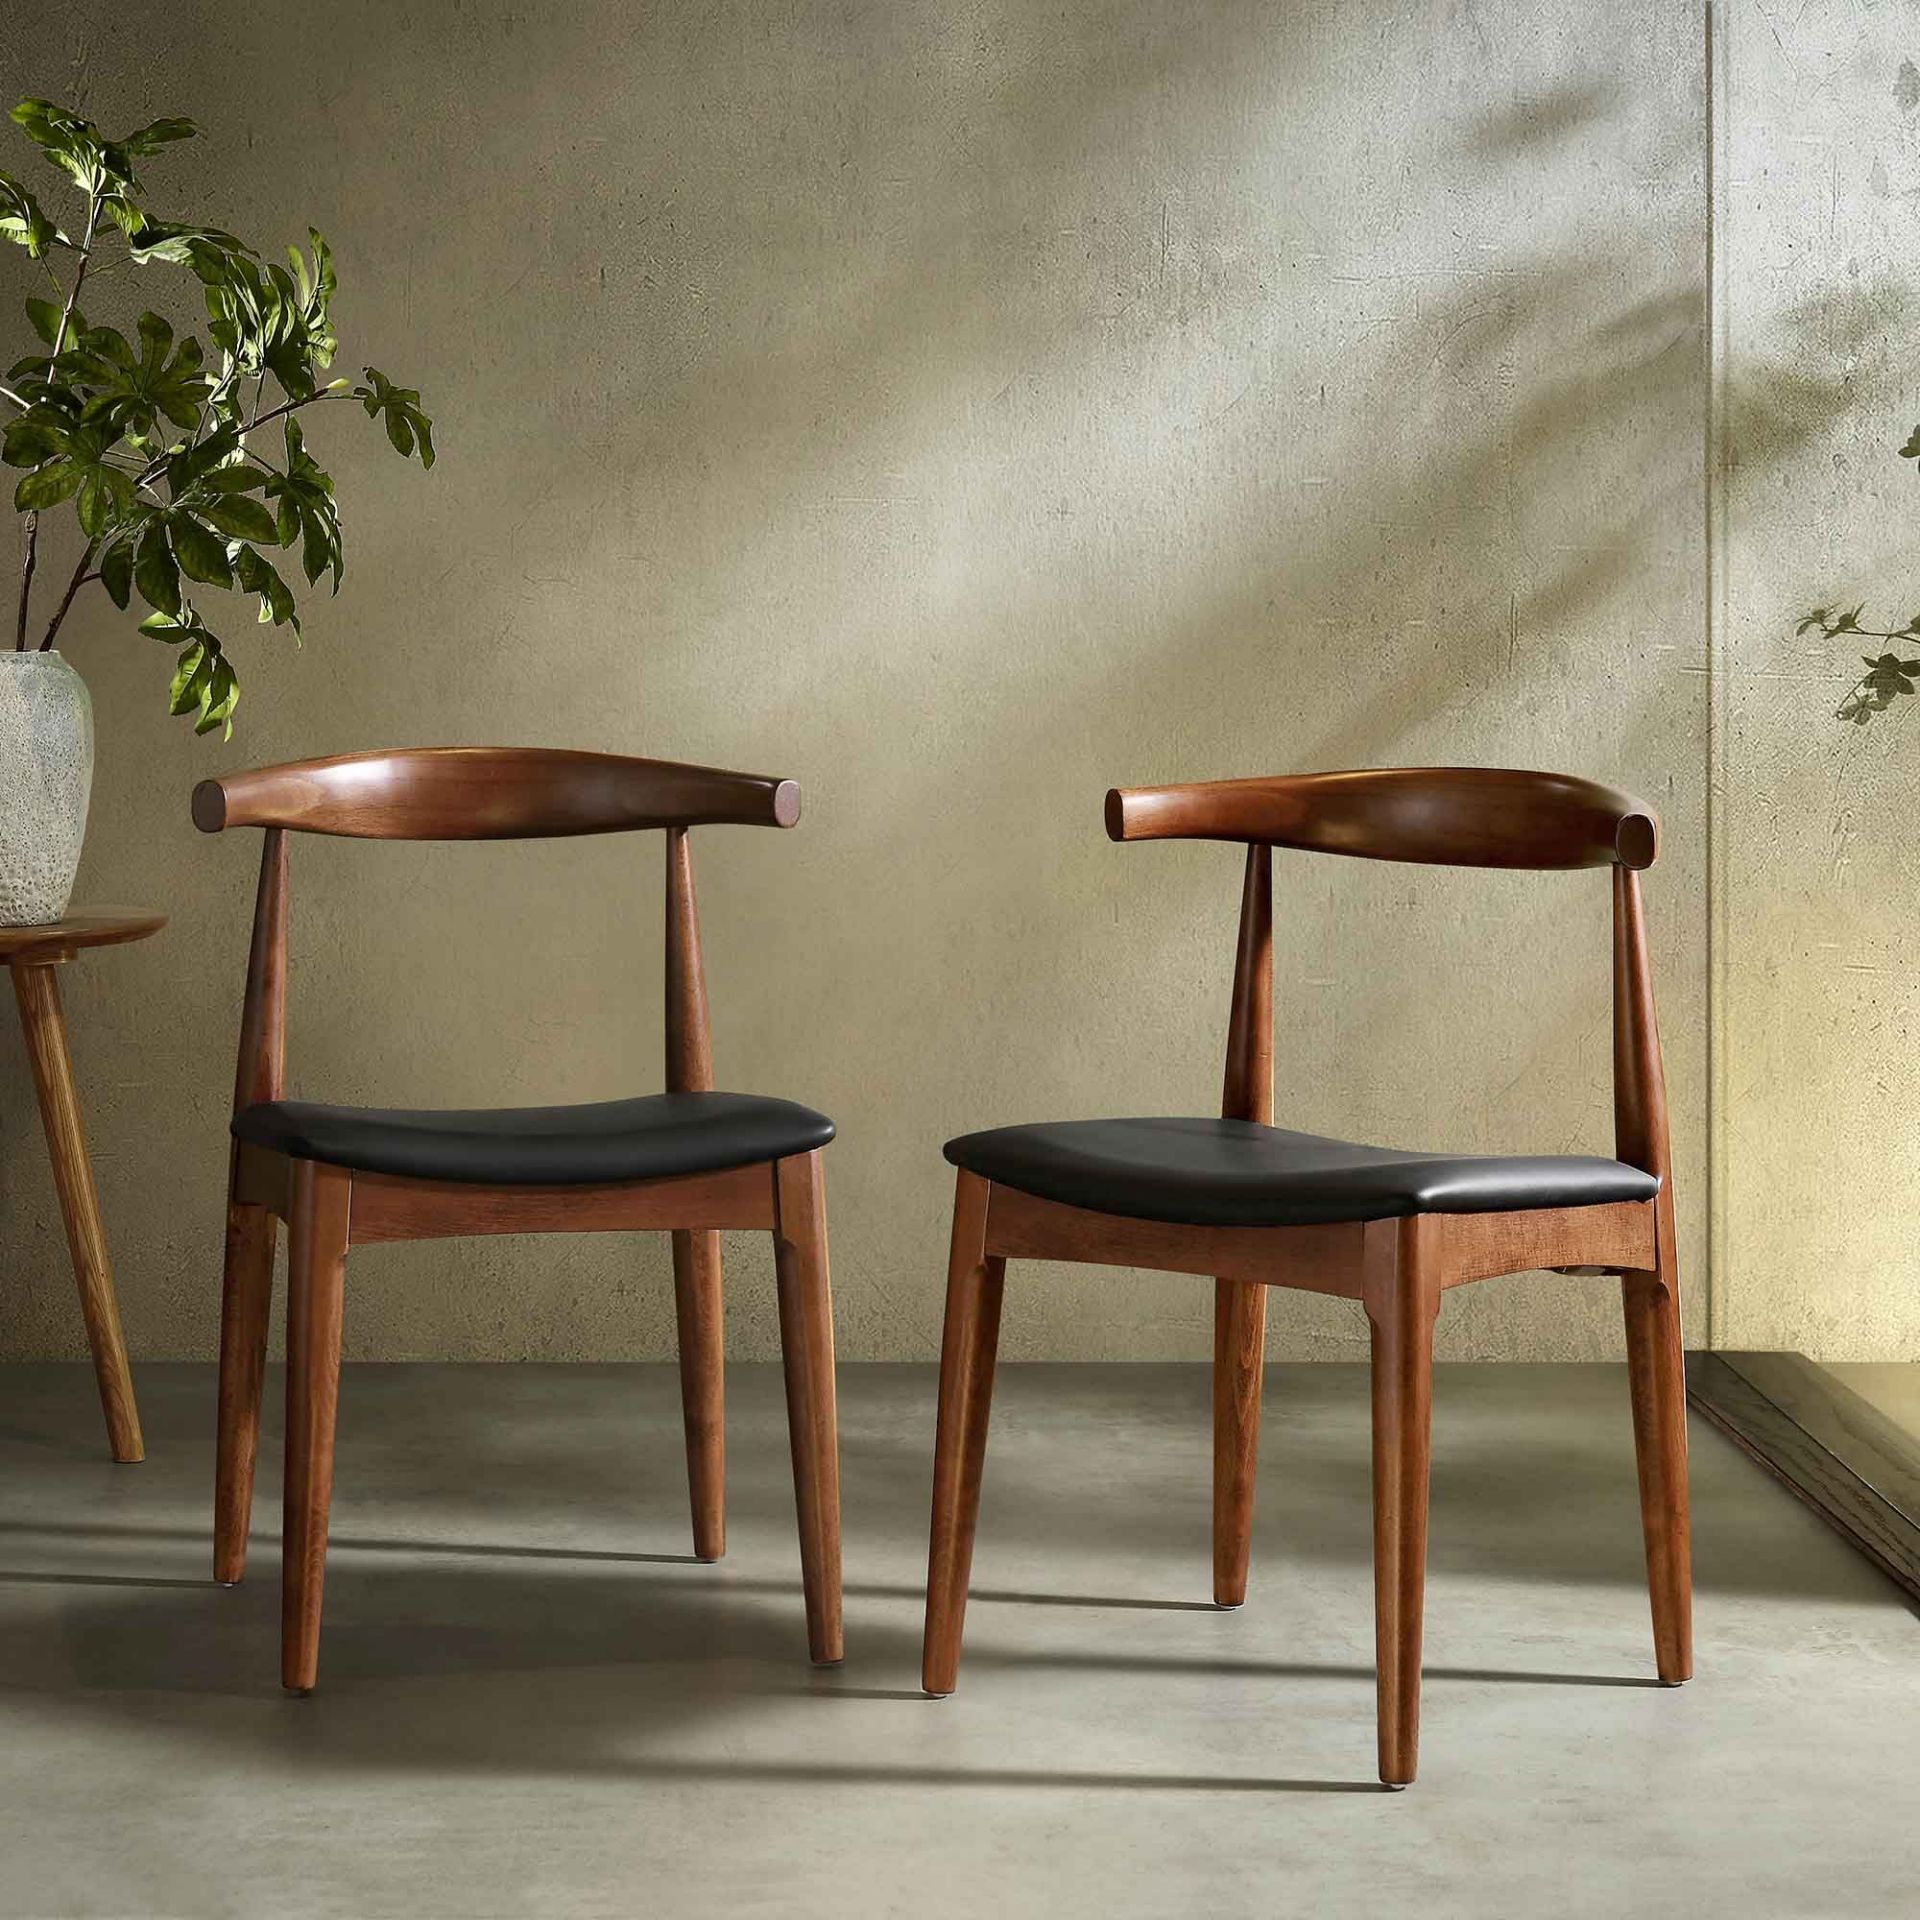 Arley Set of 2 Beech Wood Dining Chairs, Walnut and Black. - R14. RRP £289.99. The wood frame is